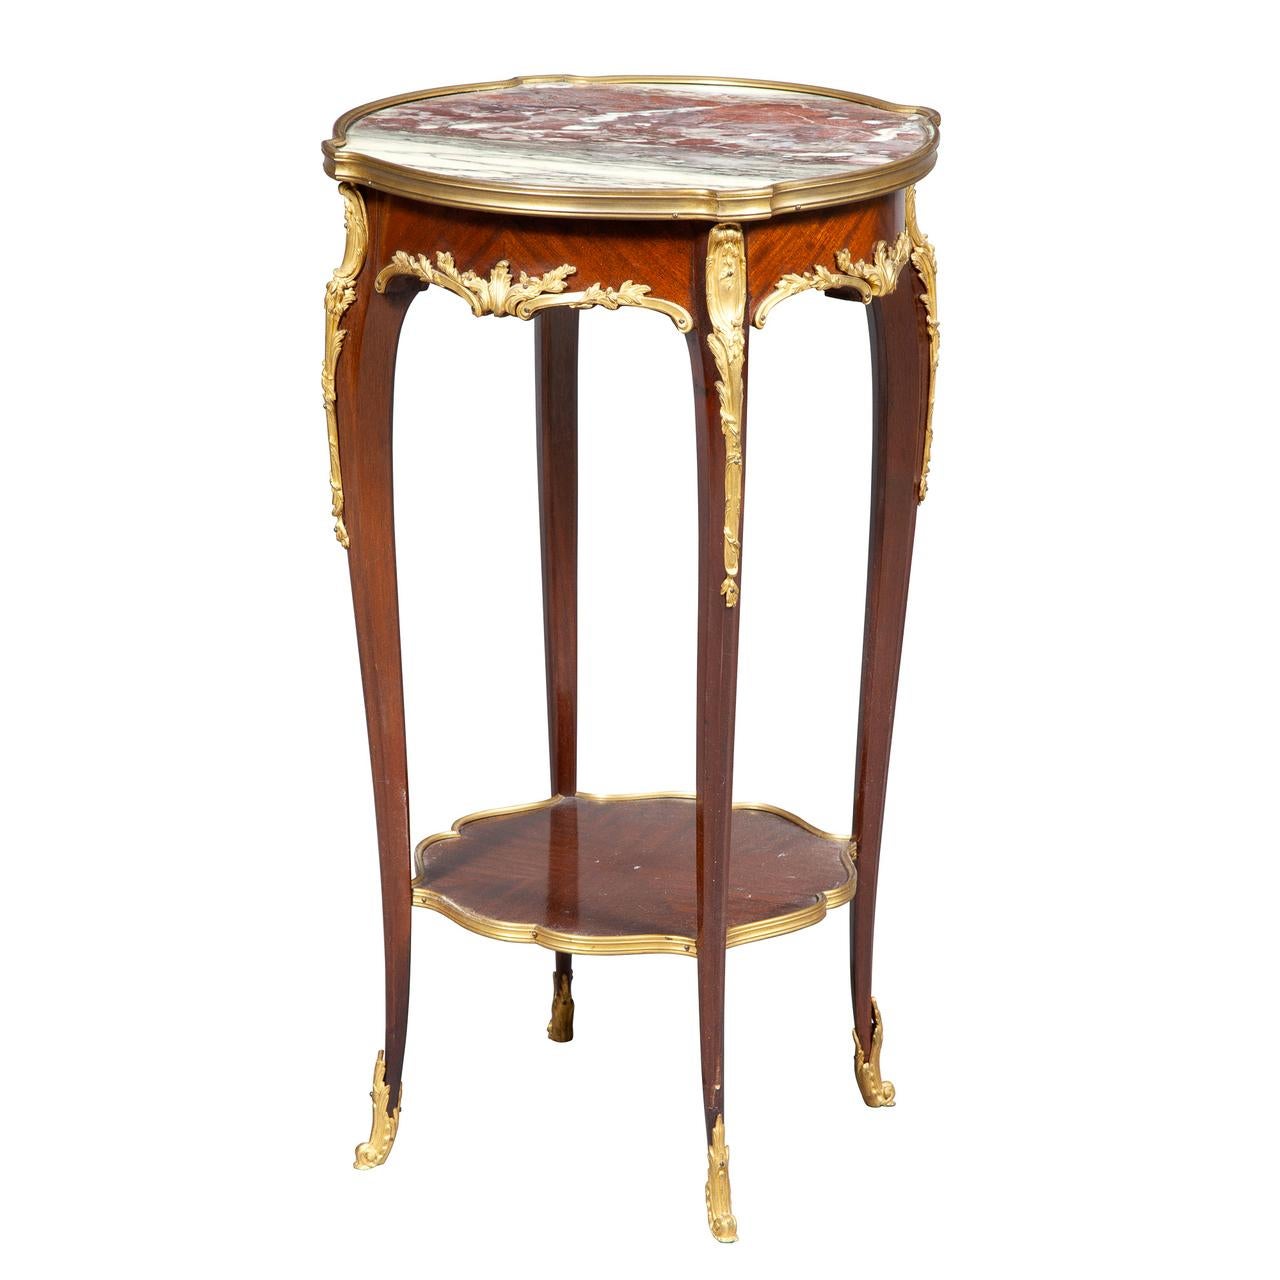 Fine quality pair of Louis XVI-style marble-top side table, the round top with bronze mounts raised on slender cabriole legs joined by a lower shelf.

Origin: French
Date: 19th century
Dimension: Height 29 3/4 x depth 17 3/4 in. diameter.